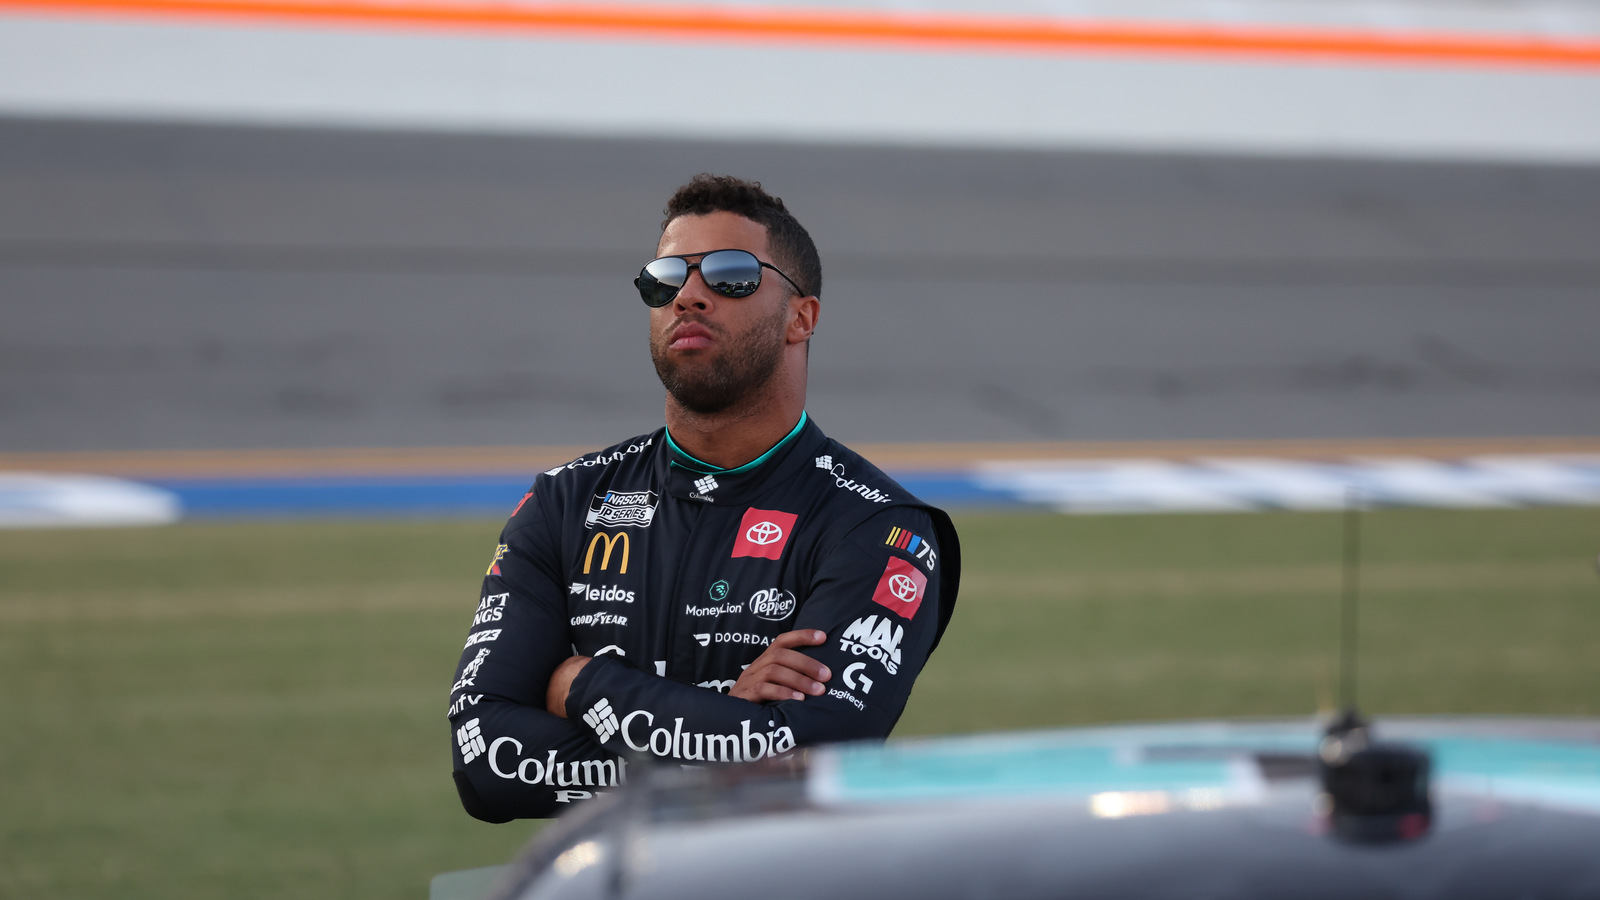 Bubba Wallace reacts to being playoff bound after ‘stressful week’